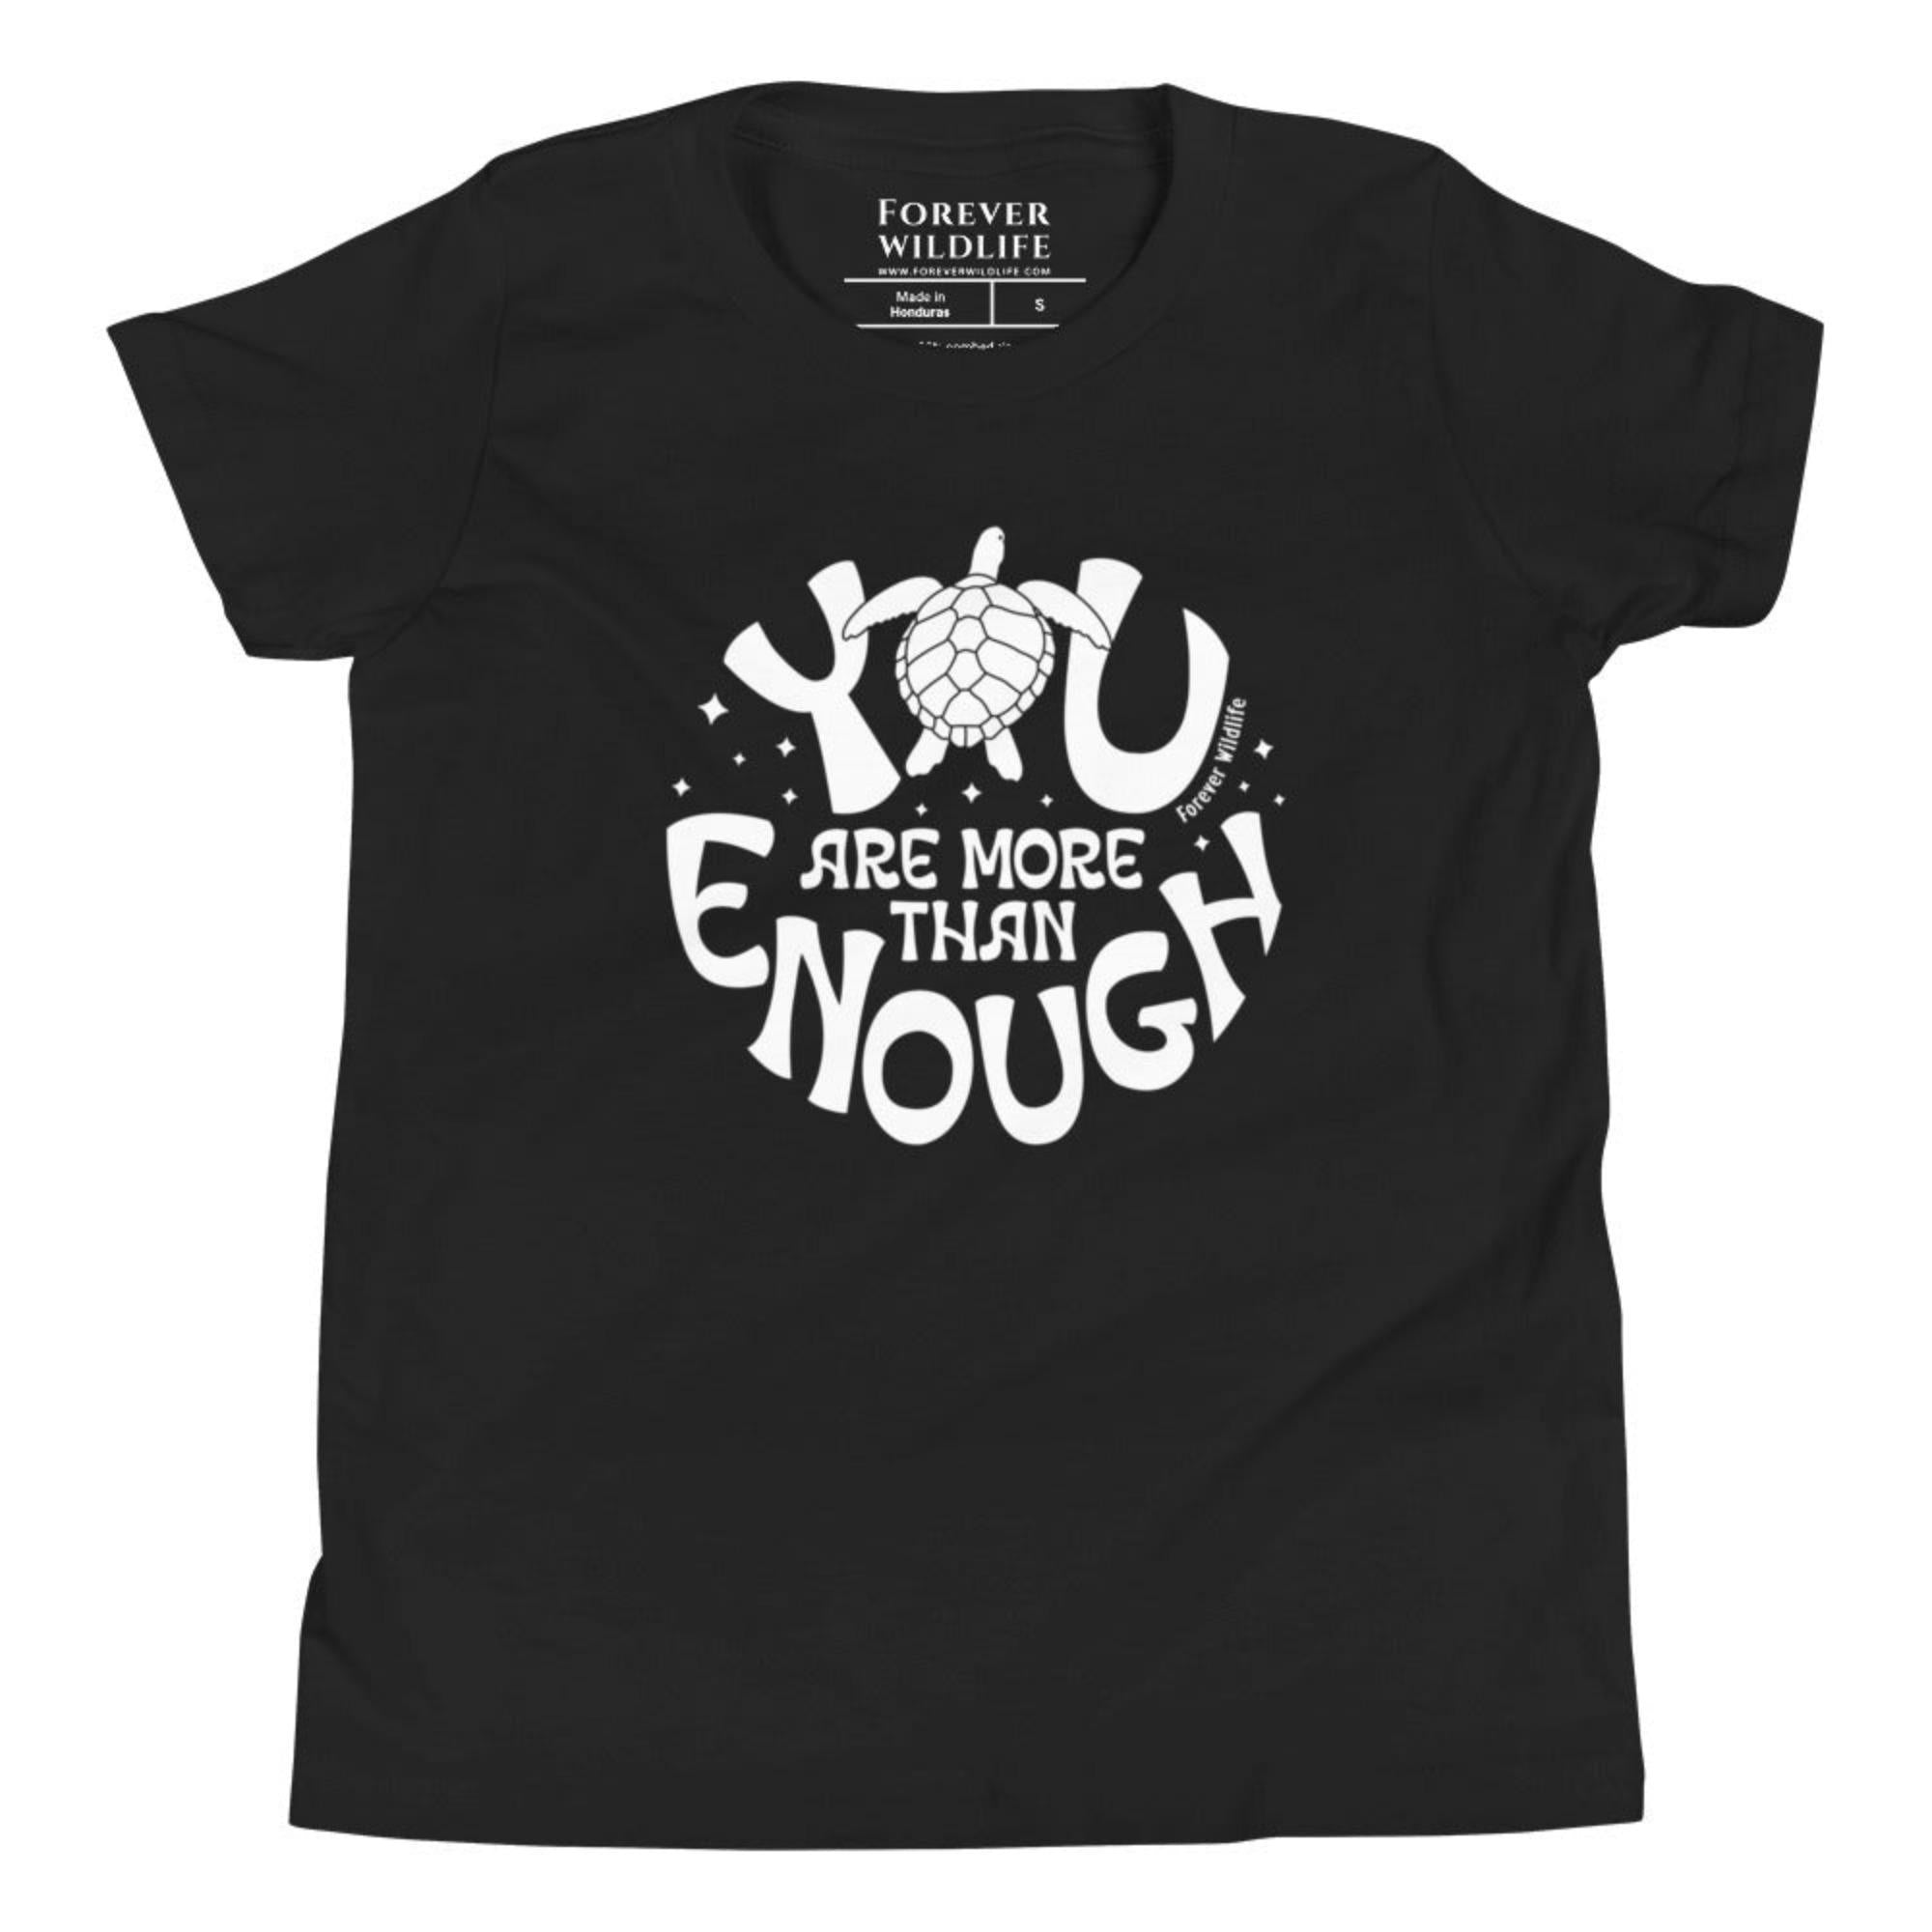 Black Youth T-Shirt with Sea Turtle graphic as part of Wildlife T-Shirts, Wildlife Clothing & Apparel by Forever Wildlife